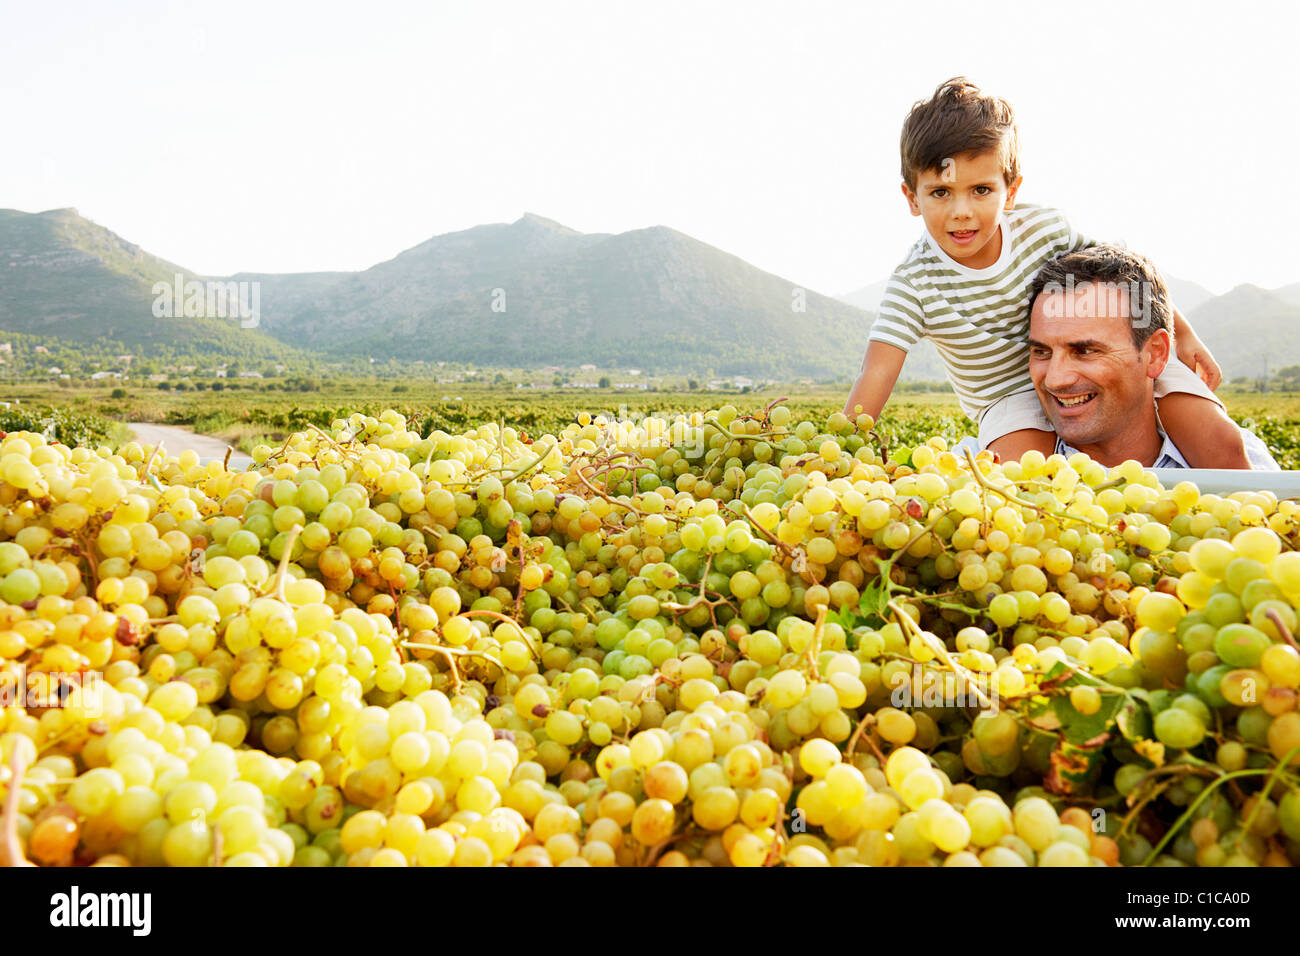 Father and son looking at pile of grapes Stock Photo